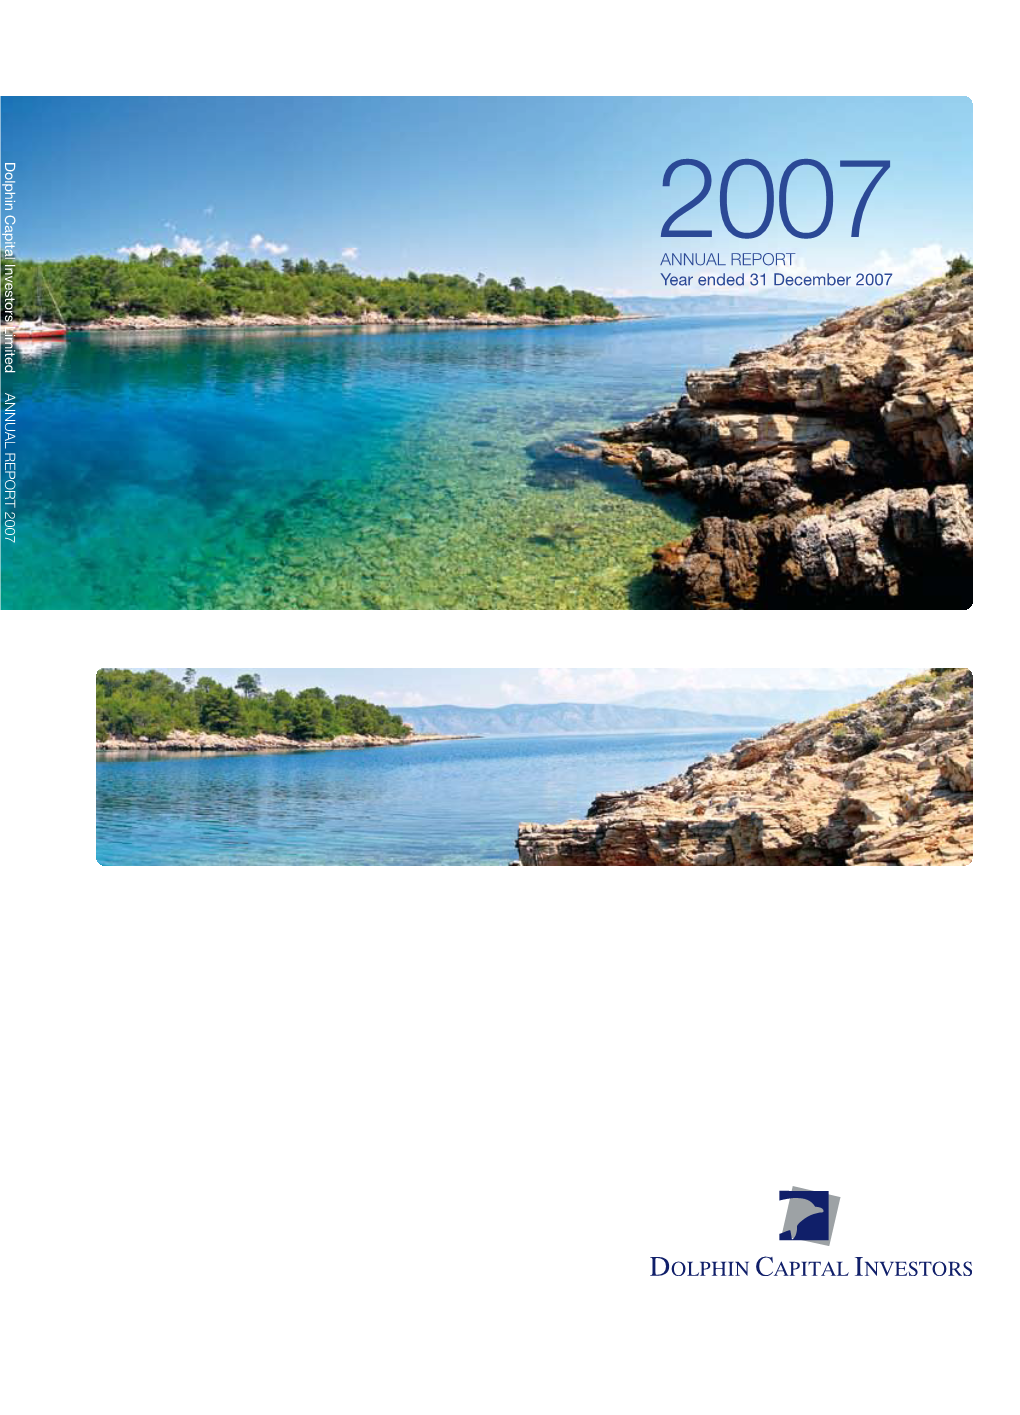 Annual REPORT Year Ended 31 December 2007 ANNUAL REPORT 2007 ANNUAL REPORT